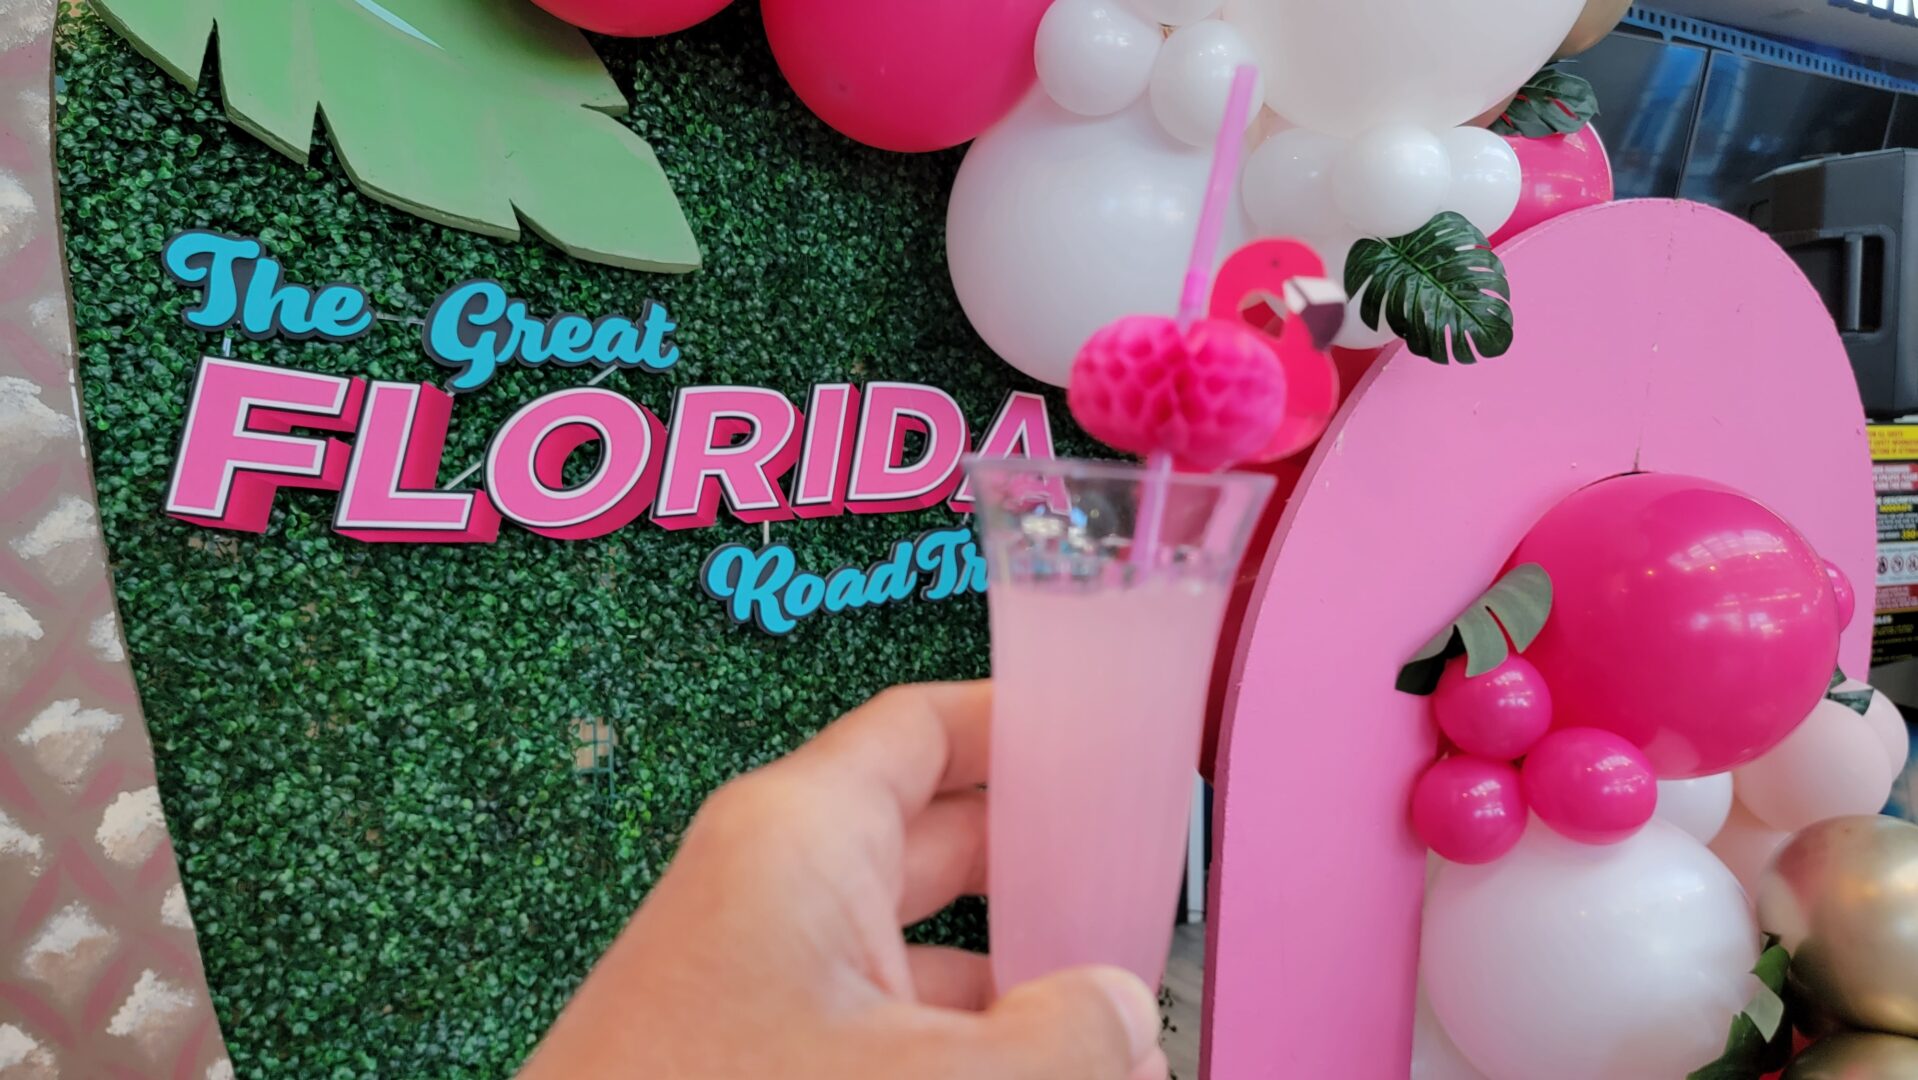 The Great Florida Road Trip launches at ICON Park